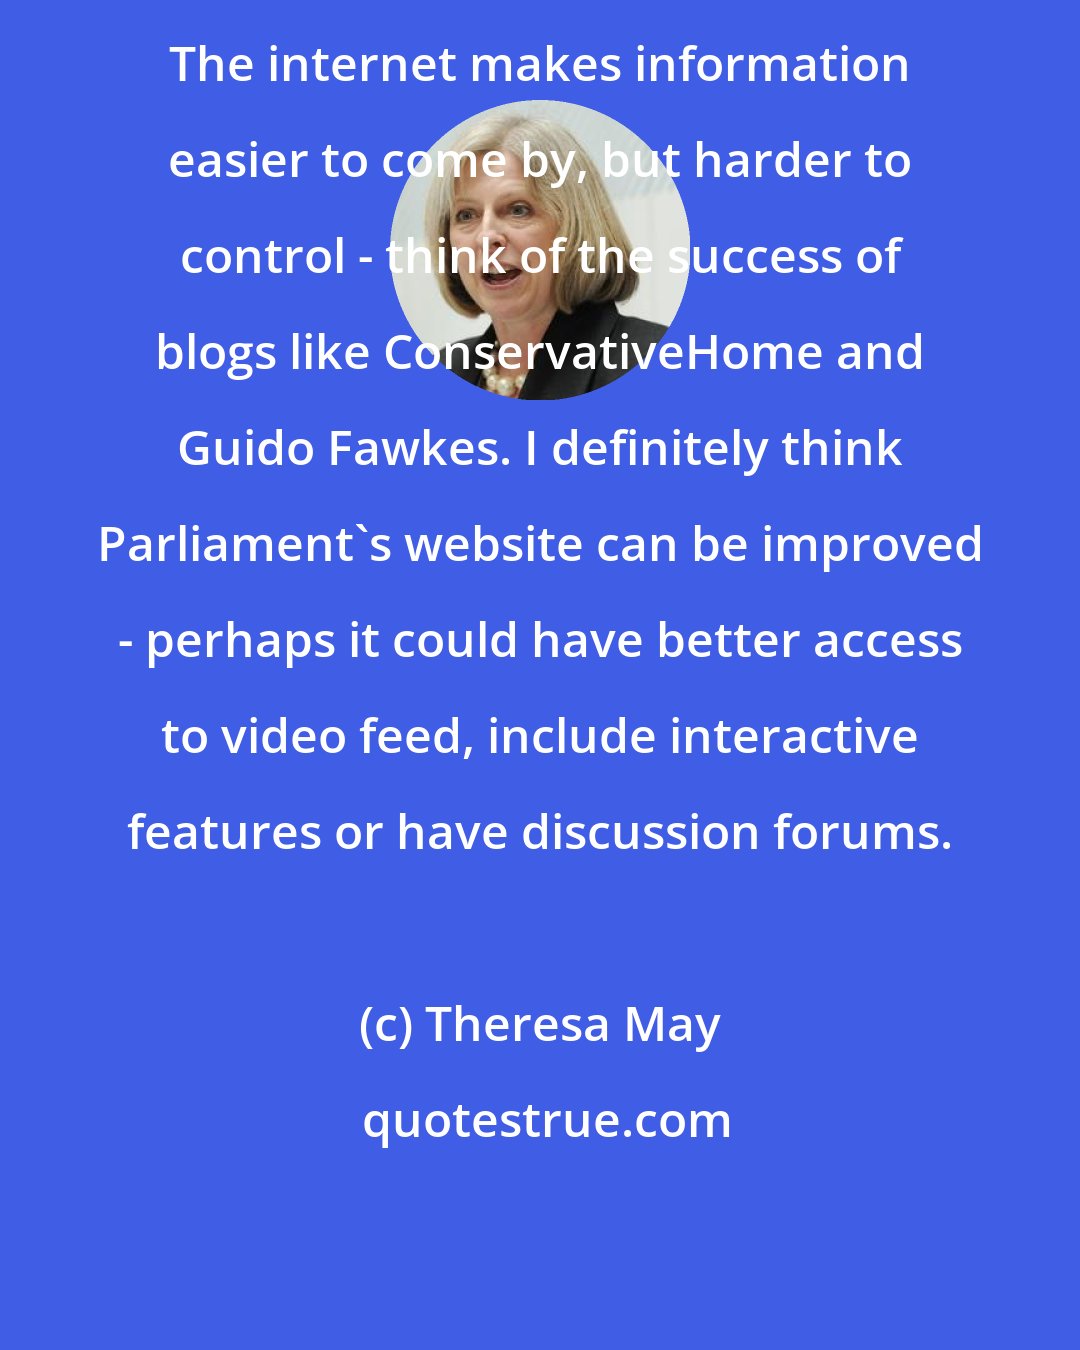 Theresa May: The internet makes information easier to come by, but harder to control - think of the success of blogs like ConservativeHome and Guido Fawkes. I definitely think Parliament's website can be improved - perhaps it could have better access to video feed, include interactive features or have discussion forums.